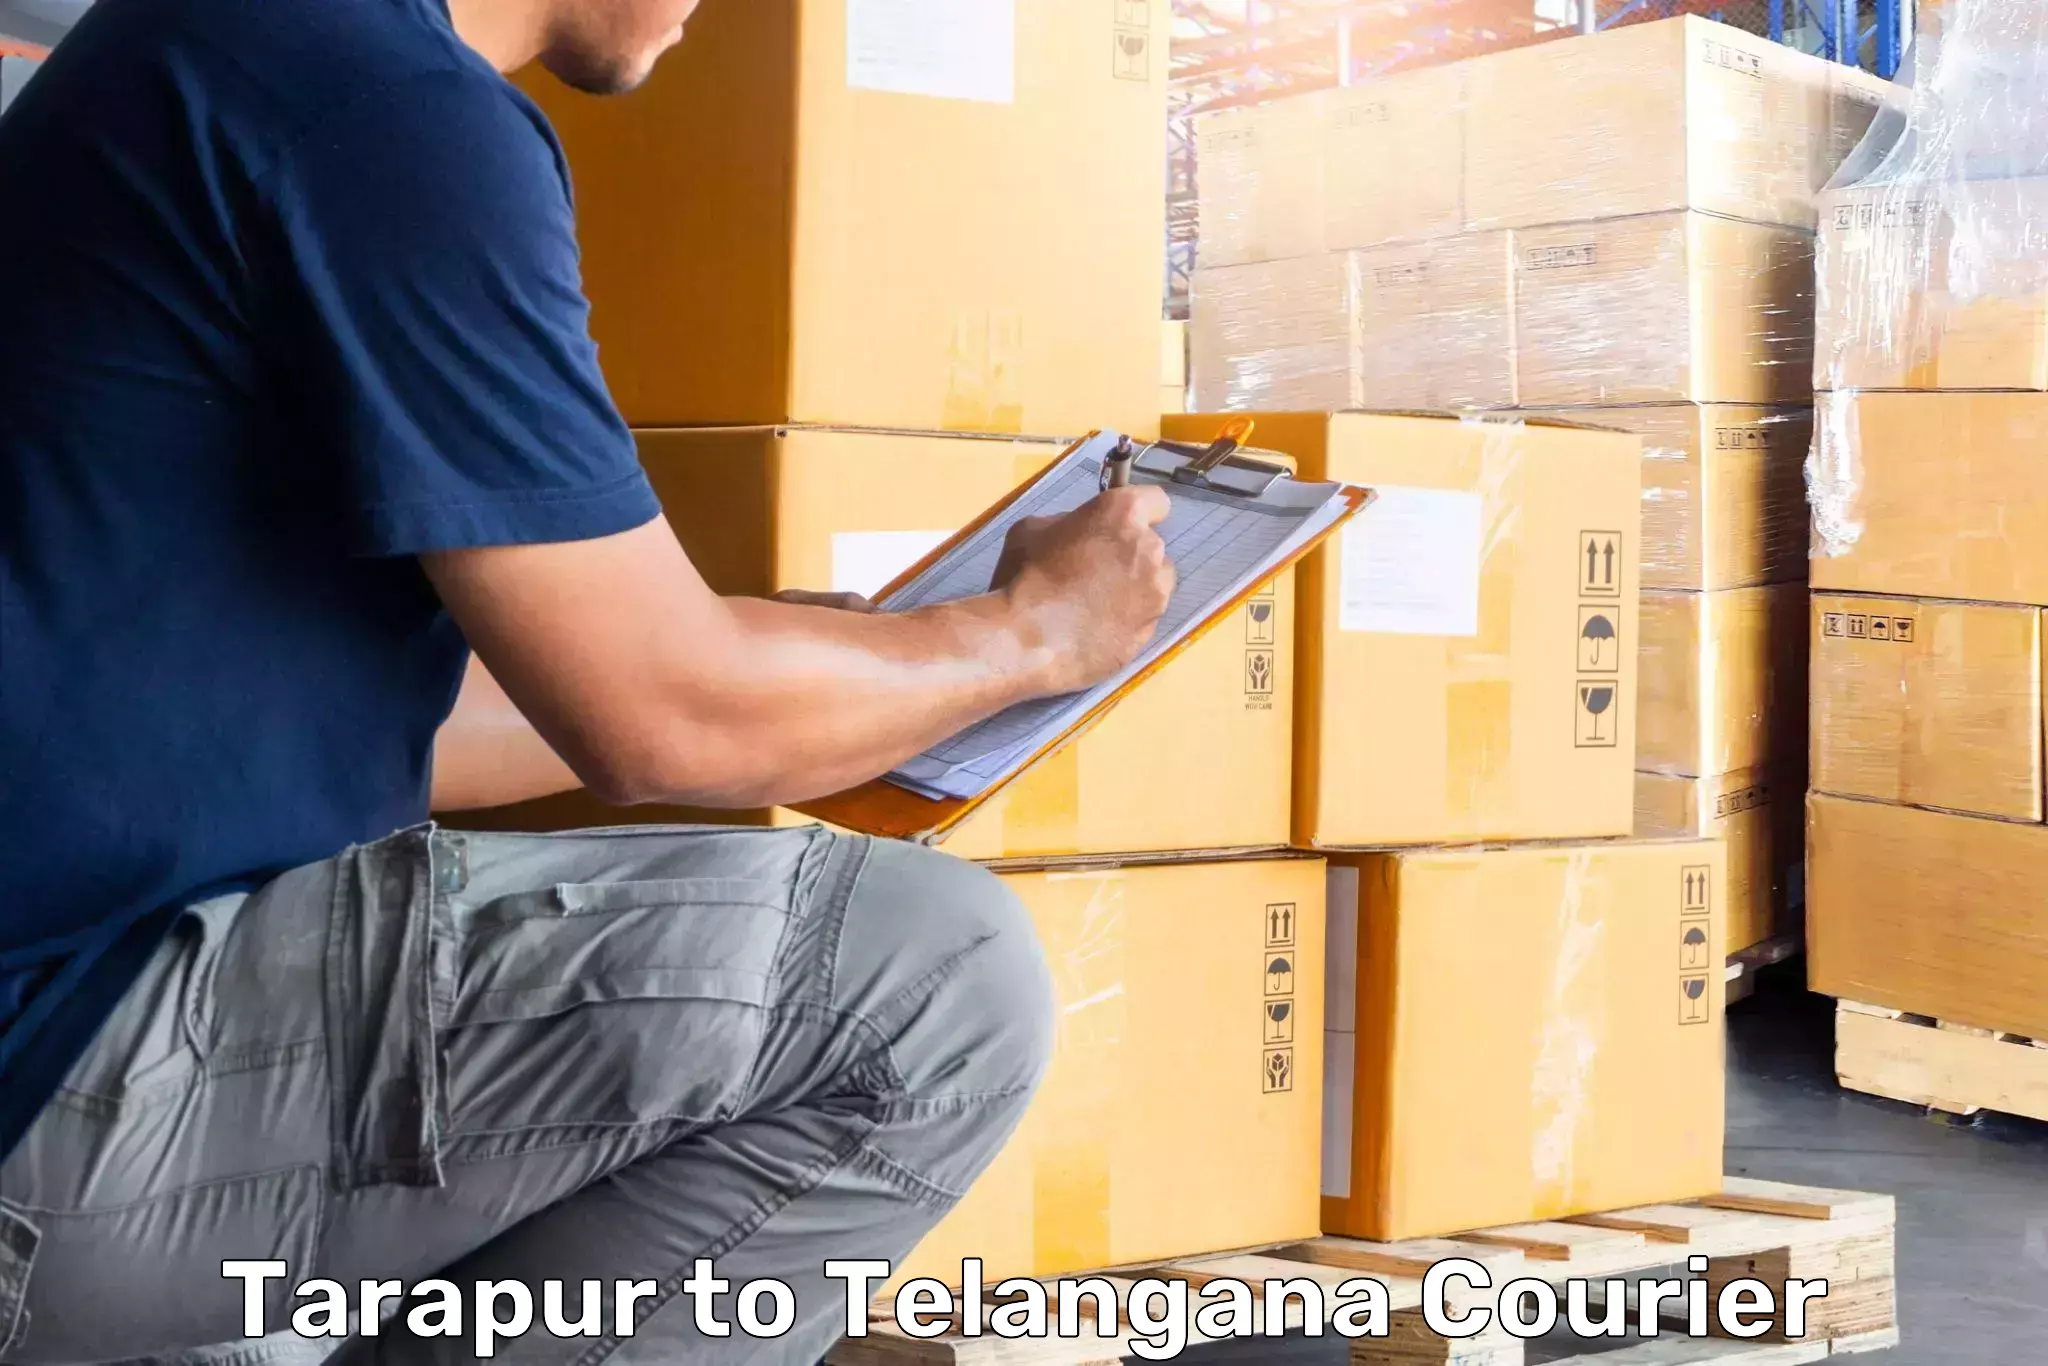 Baggage shipping experience Tarapur to Hyderabad